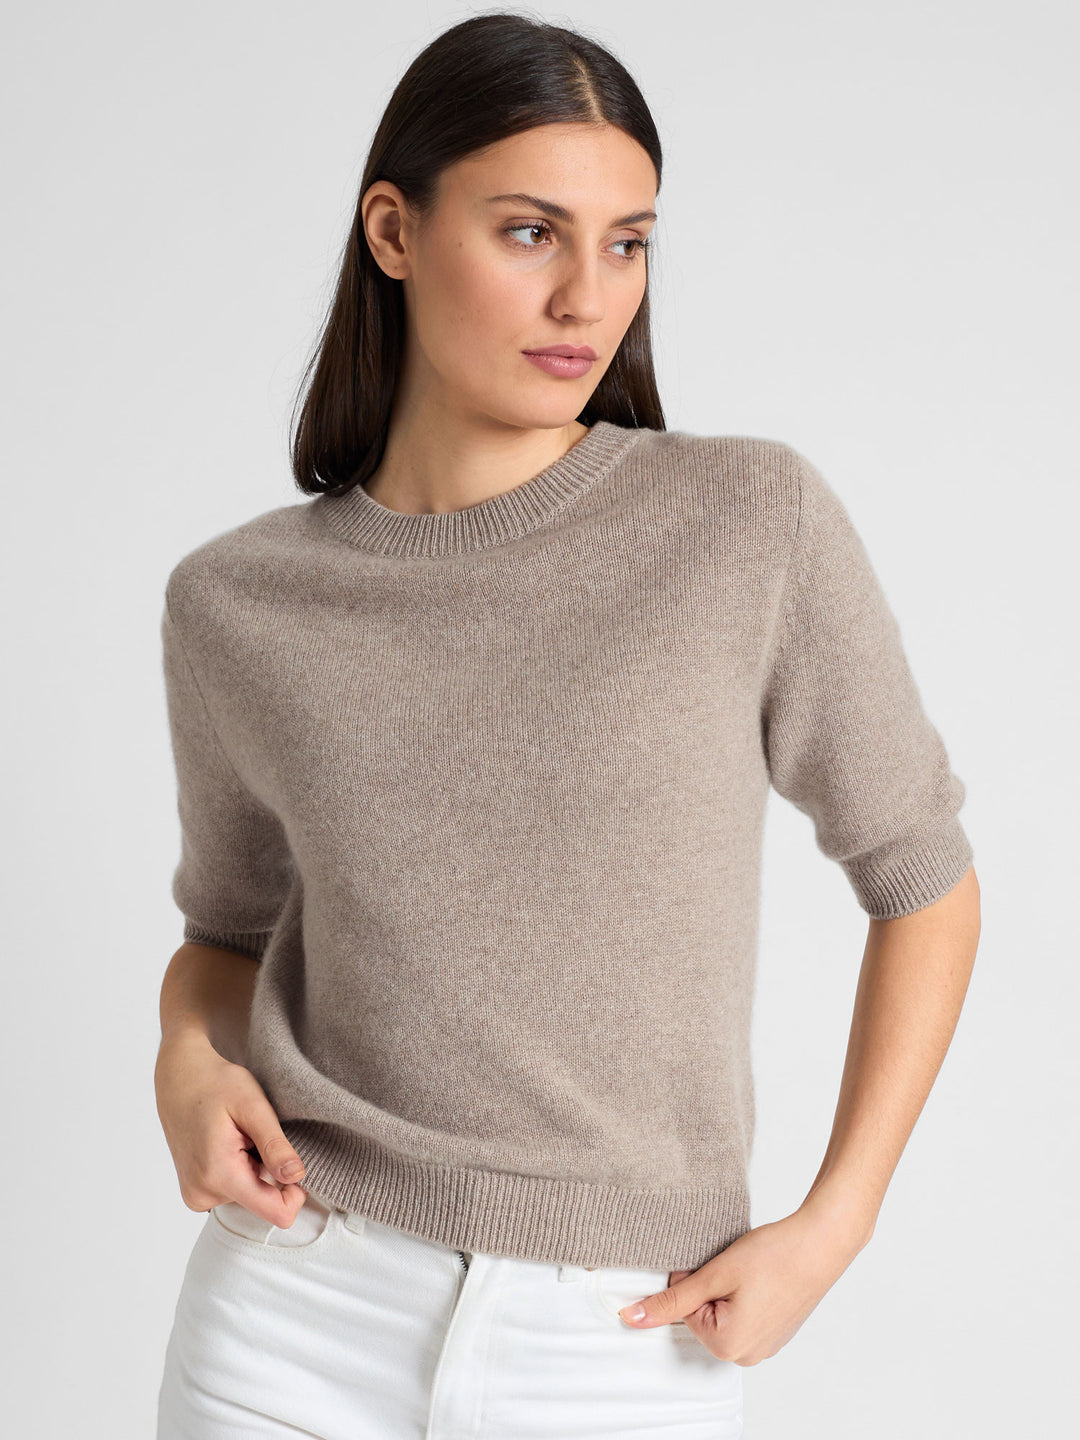 Short sleeved cashmere sweater "Aase" in 100% pure cashmere. Scandinavian design by Kashmina. Color: Toast.